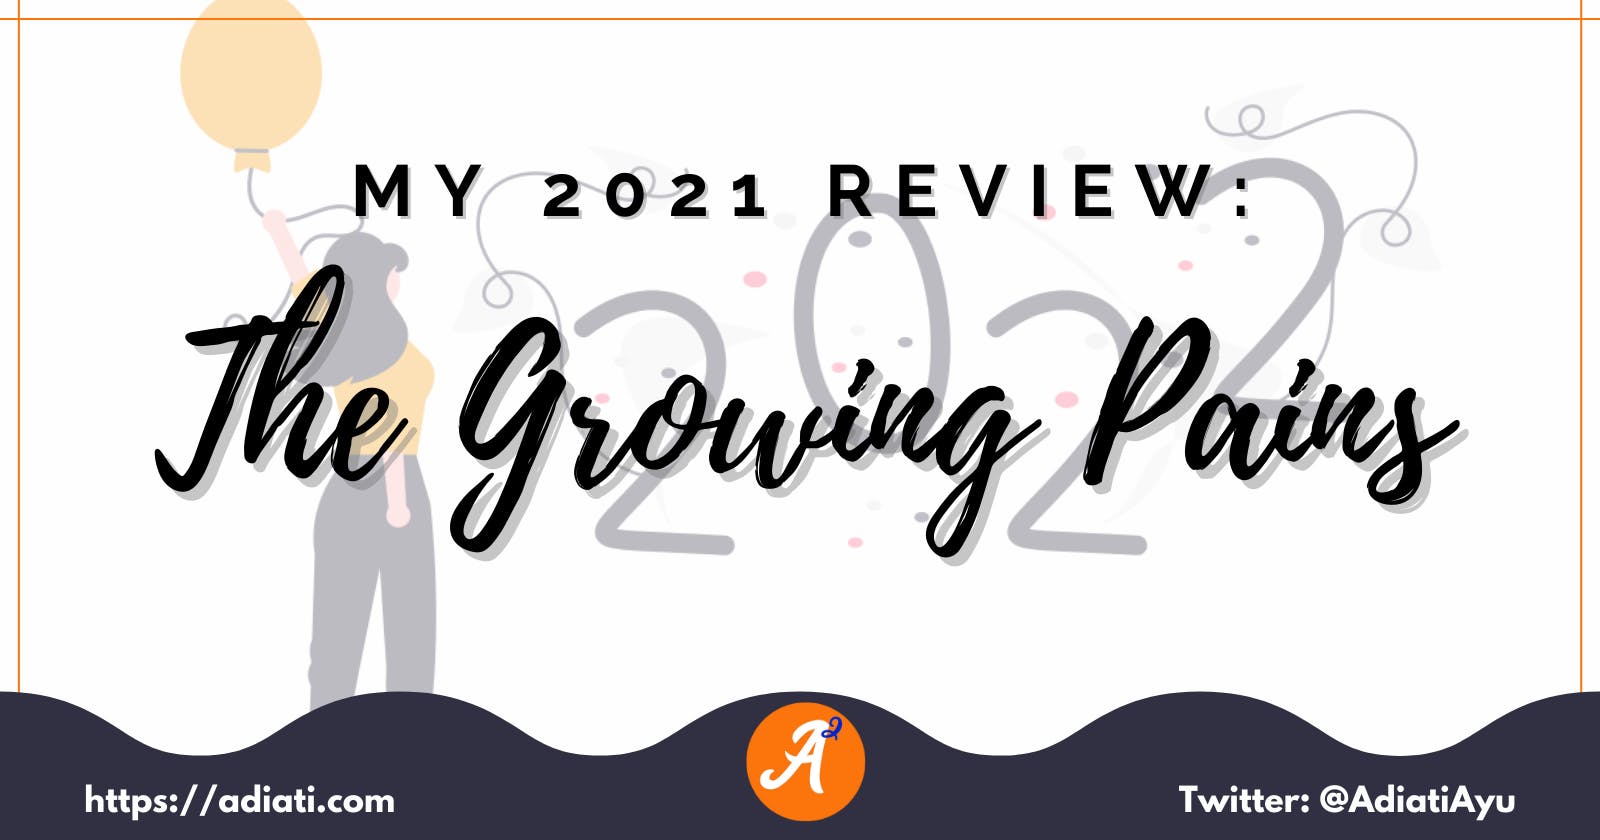 My 2021 Review: The Growing Pains